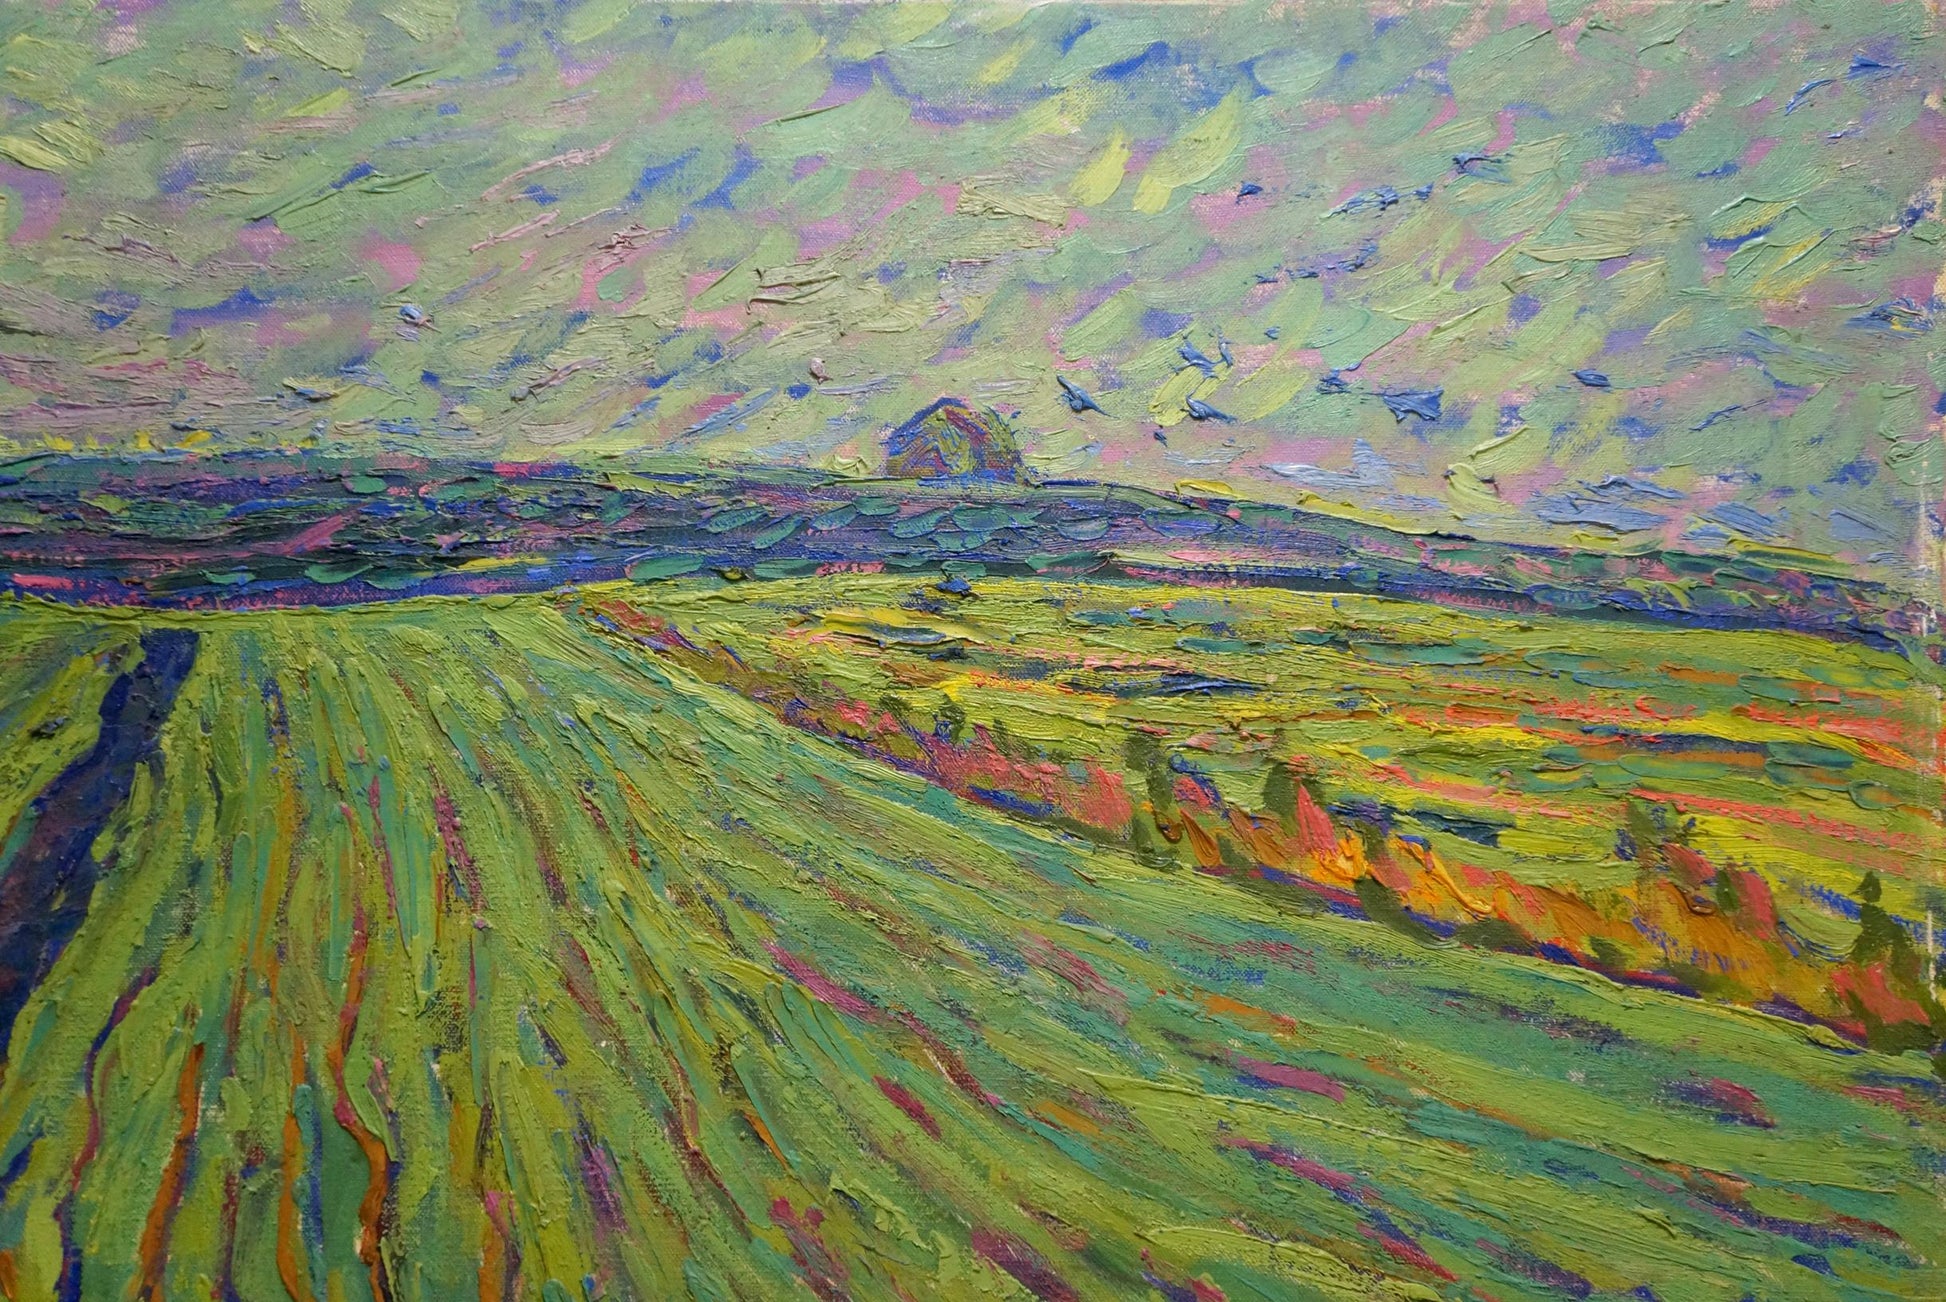 Dmitry Andreevich Chvala's oil painting capturing "Fields"